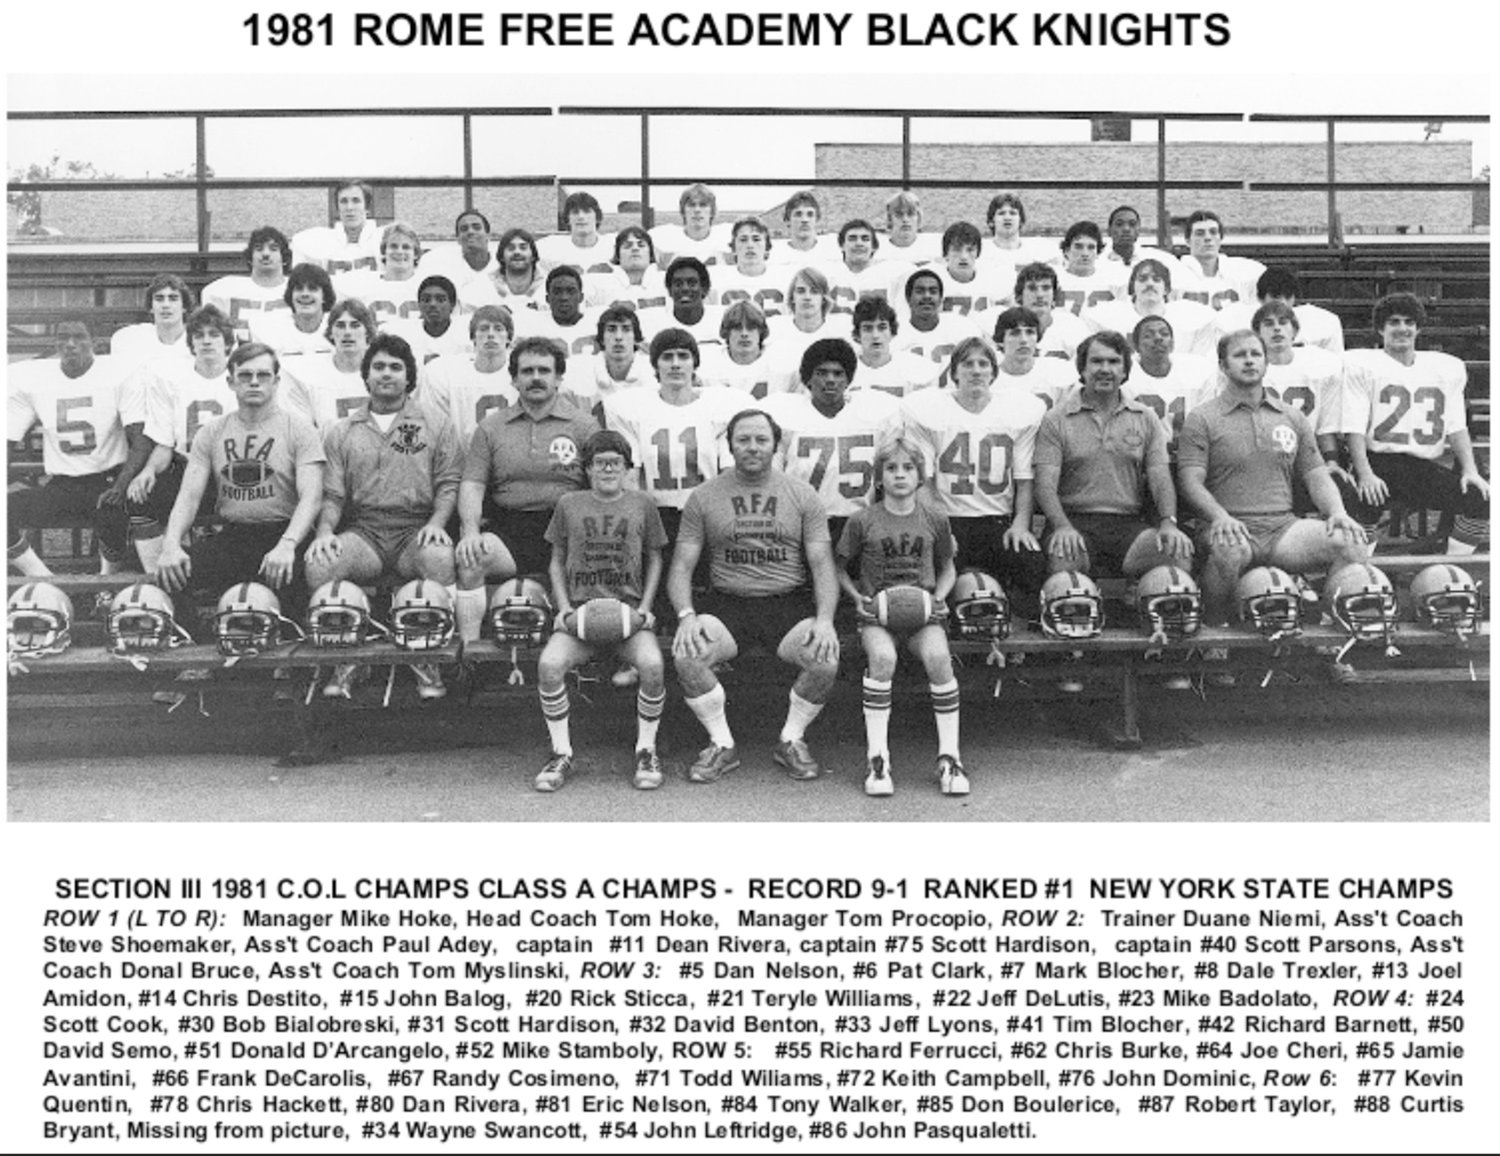 The 1981 Rome Free Academy varsity football team, which was ranked No. 1 in New York state and coached by Hall of Famer Tom Hoke, is the 2020 recipient of the Rome Sports Hall of Fame’s Ellie Bruce Exceptional Team of Excellence Award.